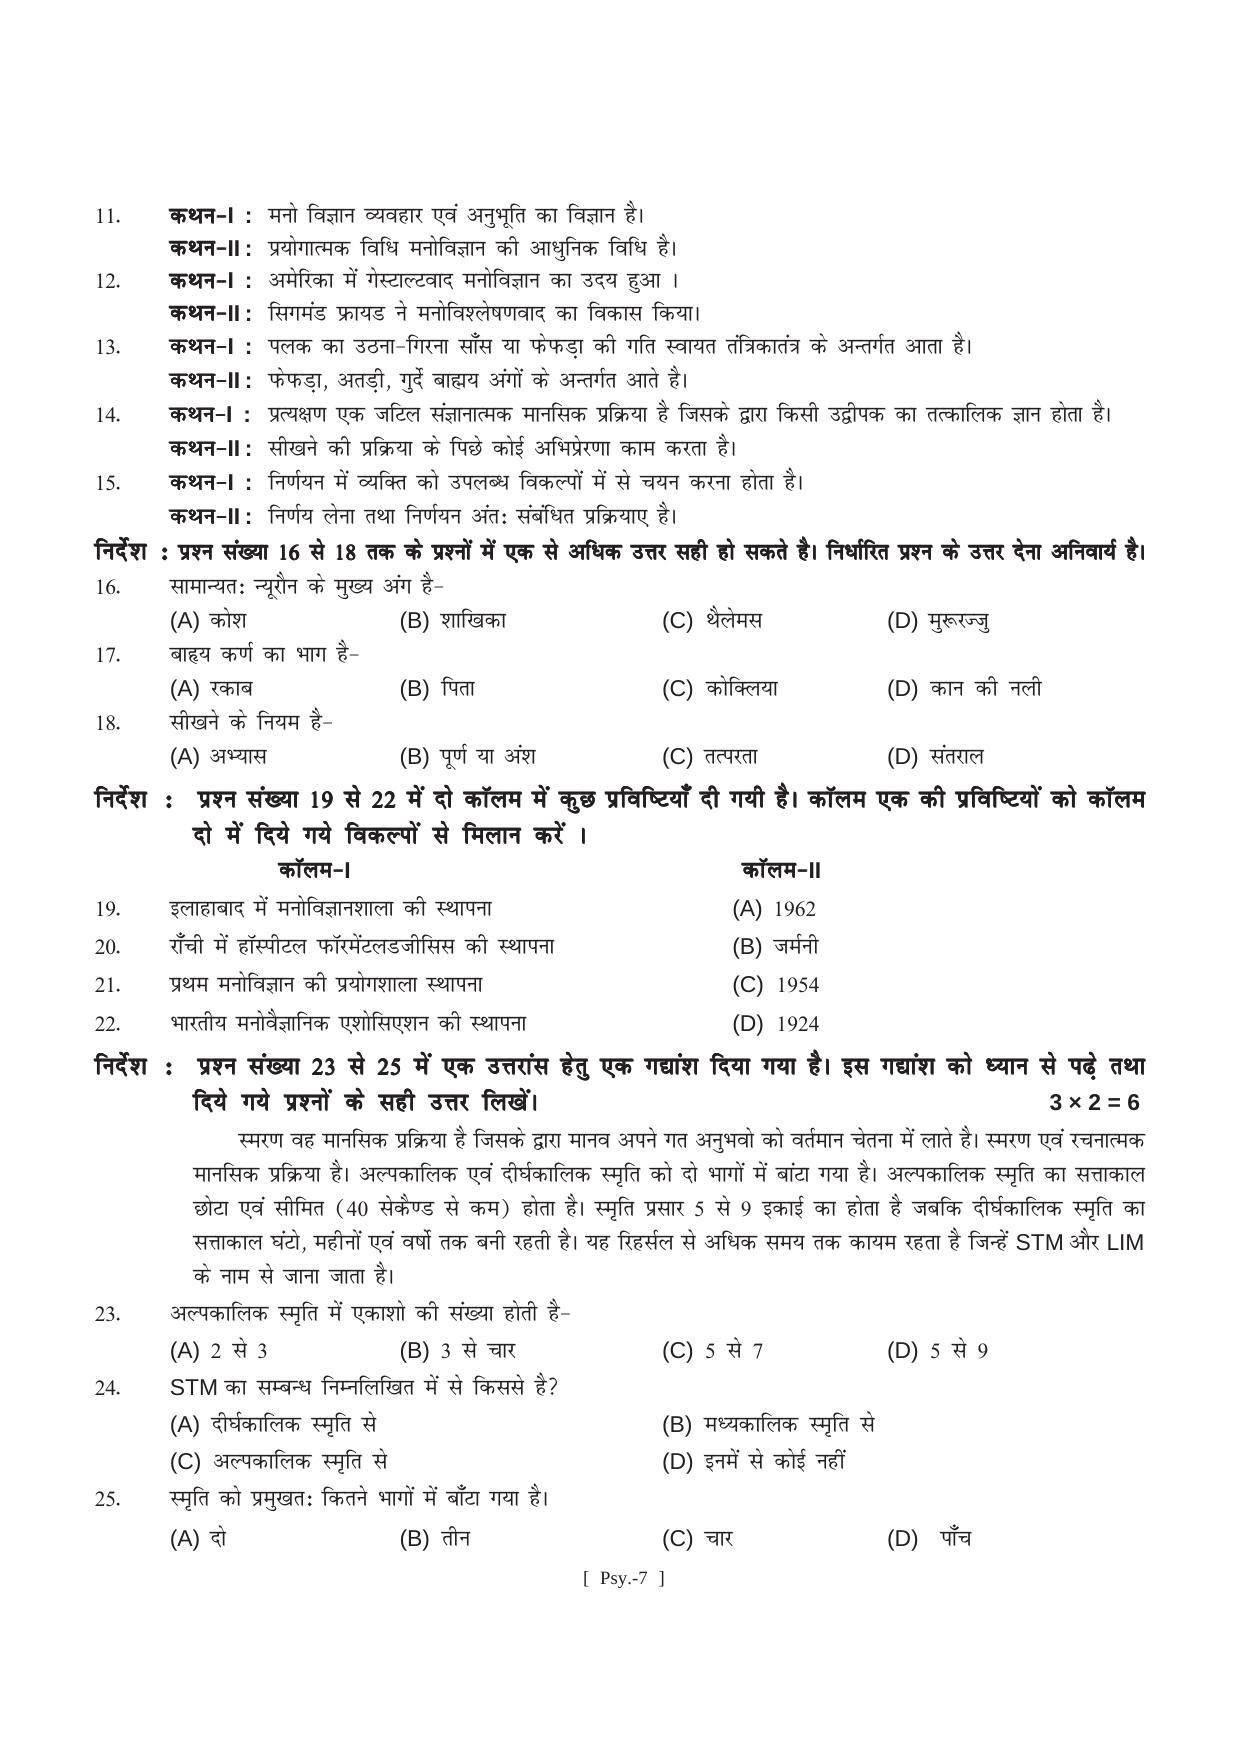 Bihar Board Class 11 Psychology (All Groups) Model Paper - Page 7